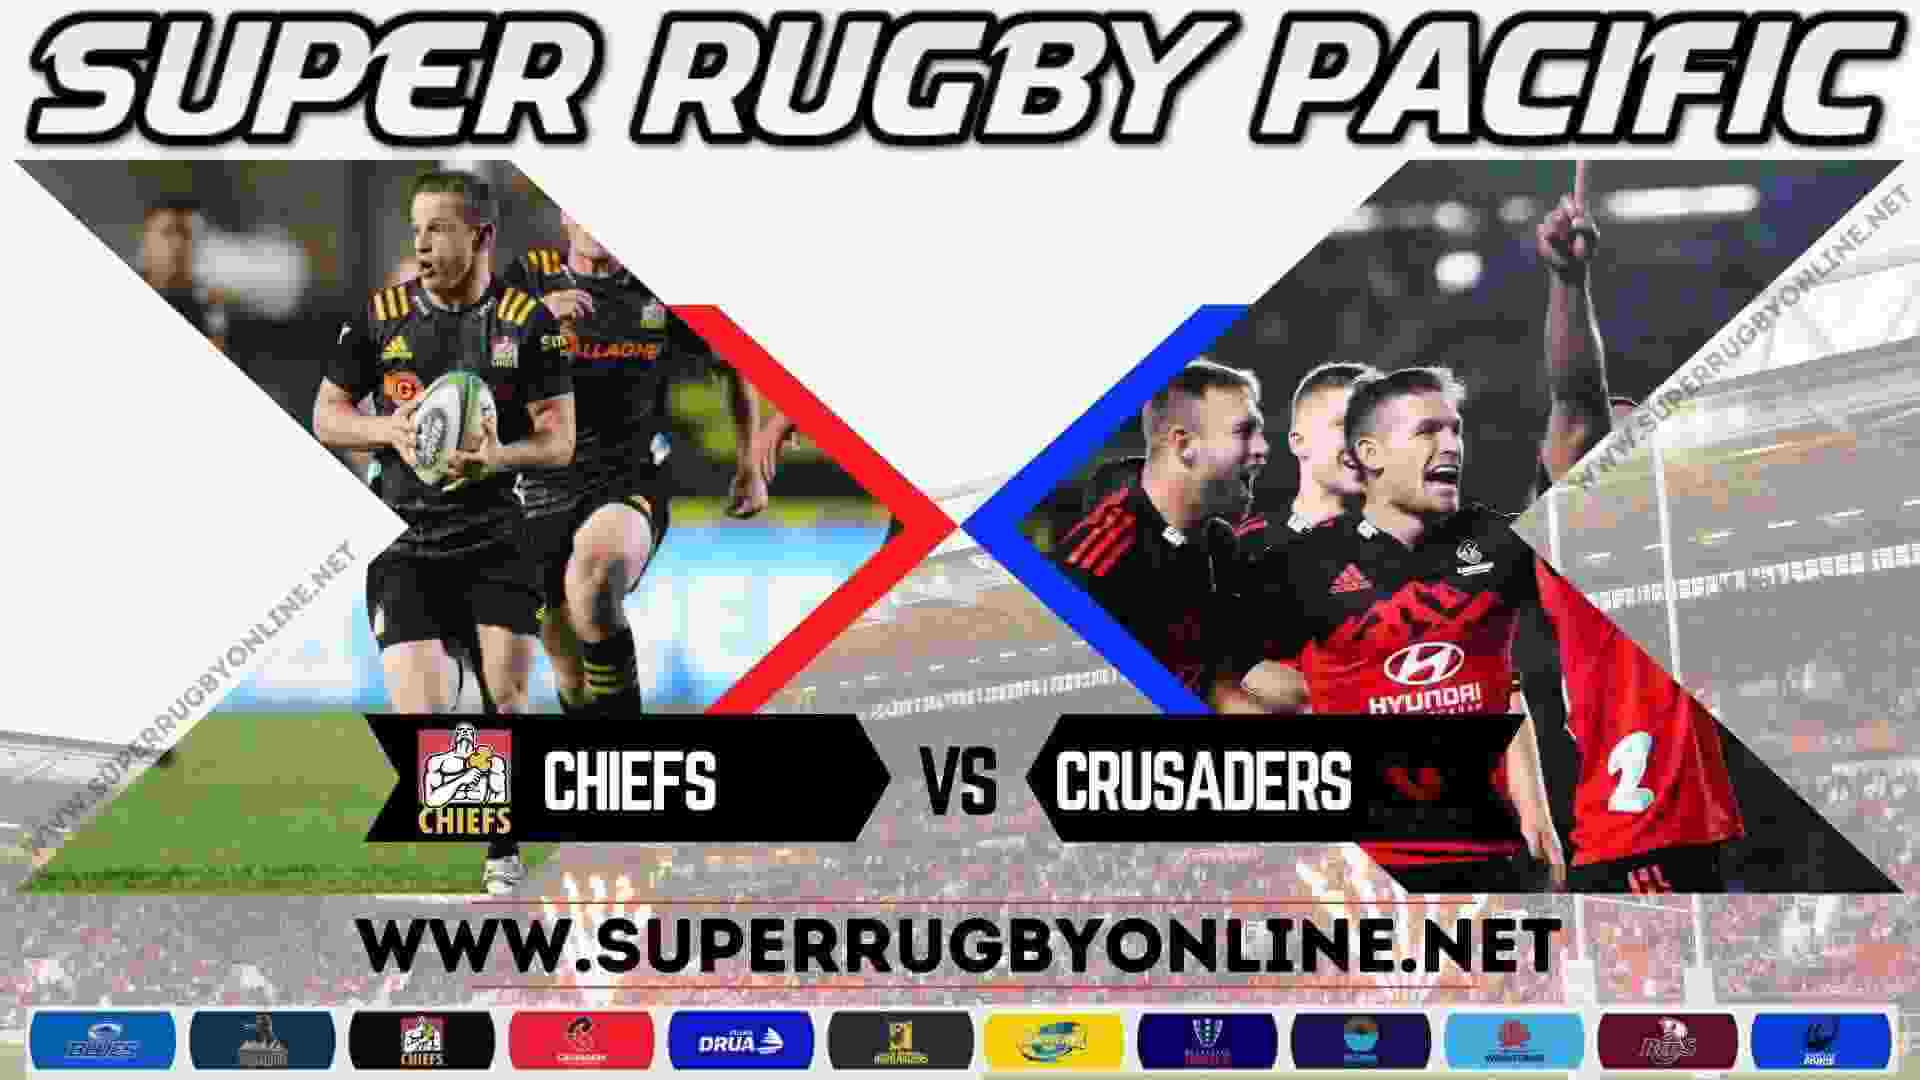 Crusaders Vs Chiefs Super Rugby Live Stream